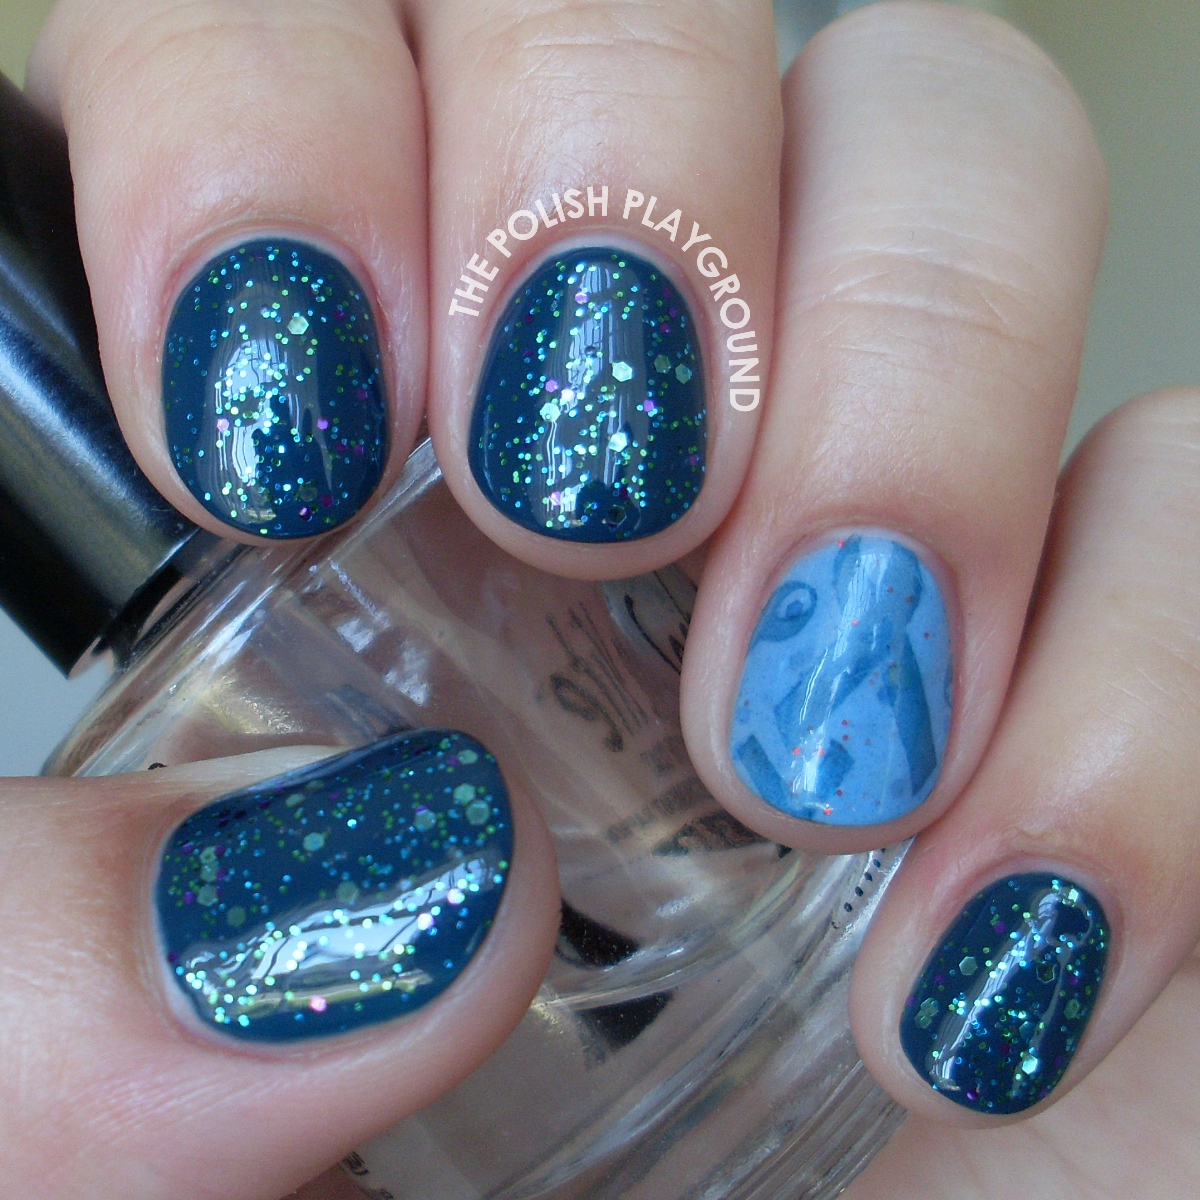 Glittery Teal with Ribbon Stamping Accent Nail Art for Ovarian Cancer Awareness